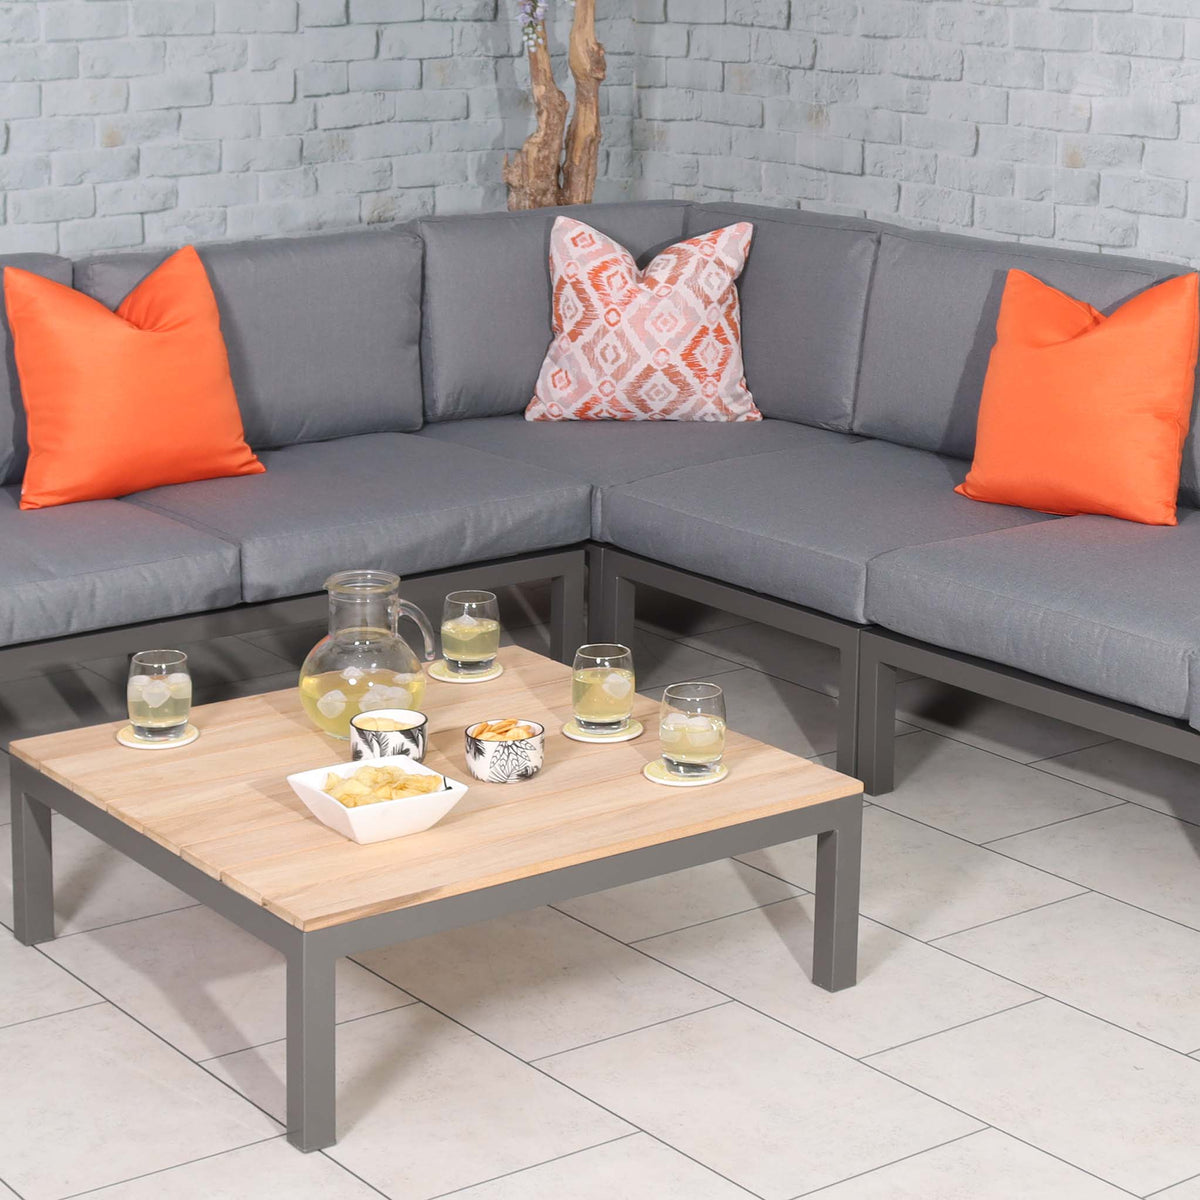 Aspen Large Garden Lounge Set with Teak Coffee & Side Tables close up of corner sofa section